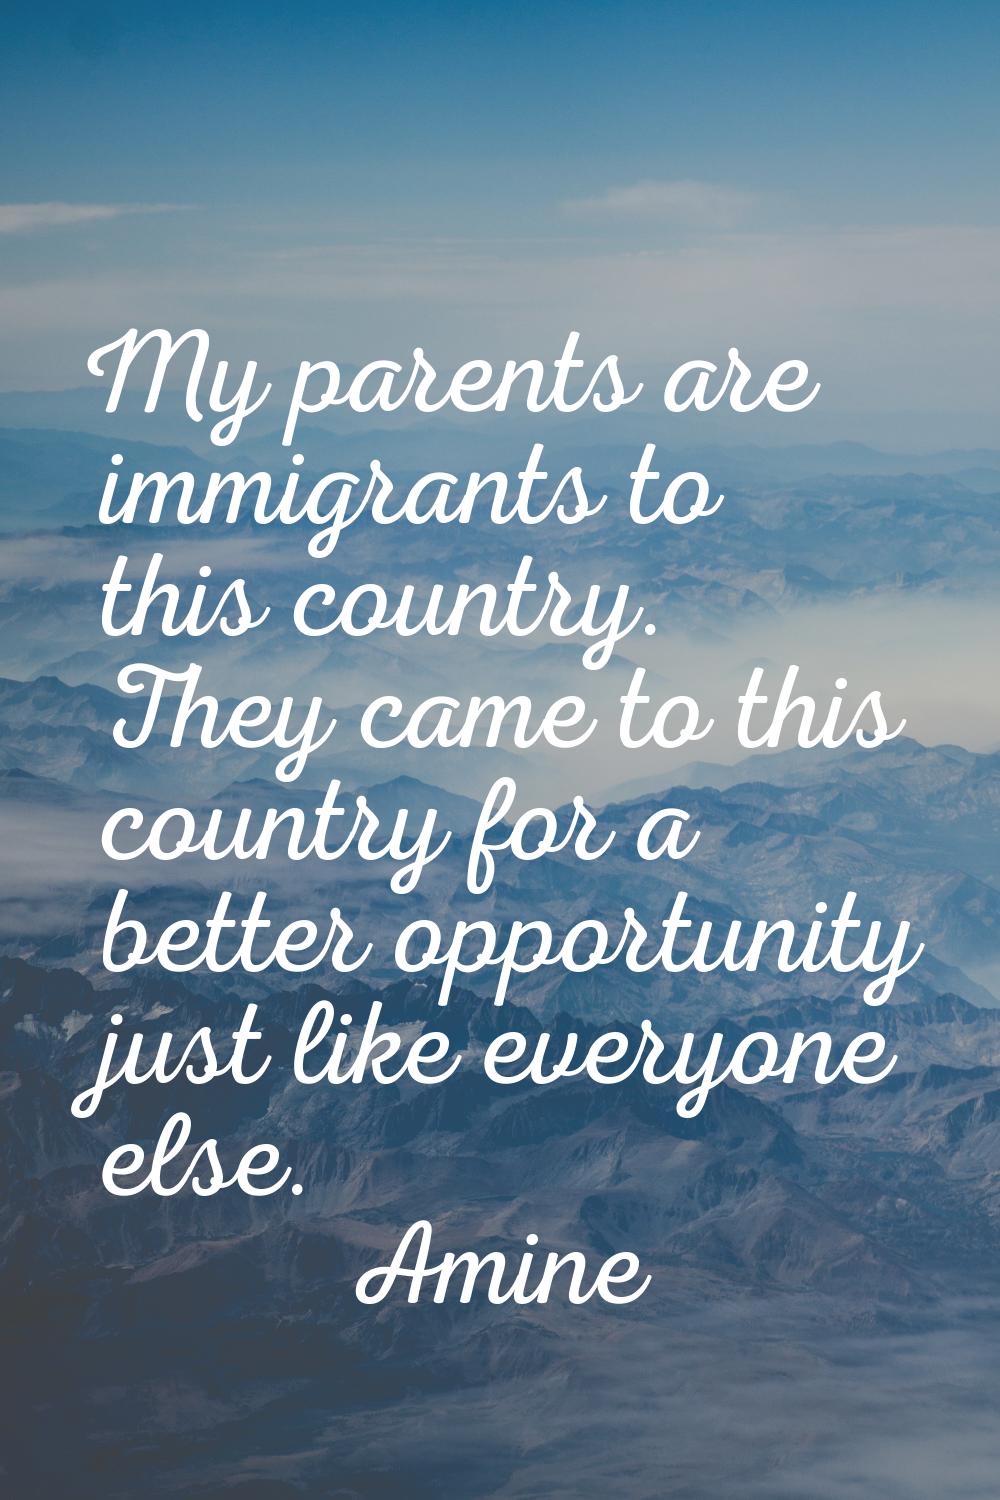 My parents are immigrants to this country. They came to this country for a better opportunity just 